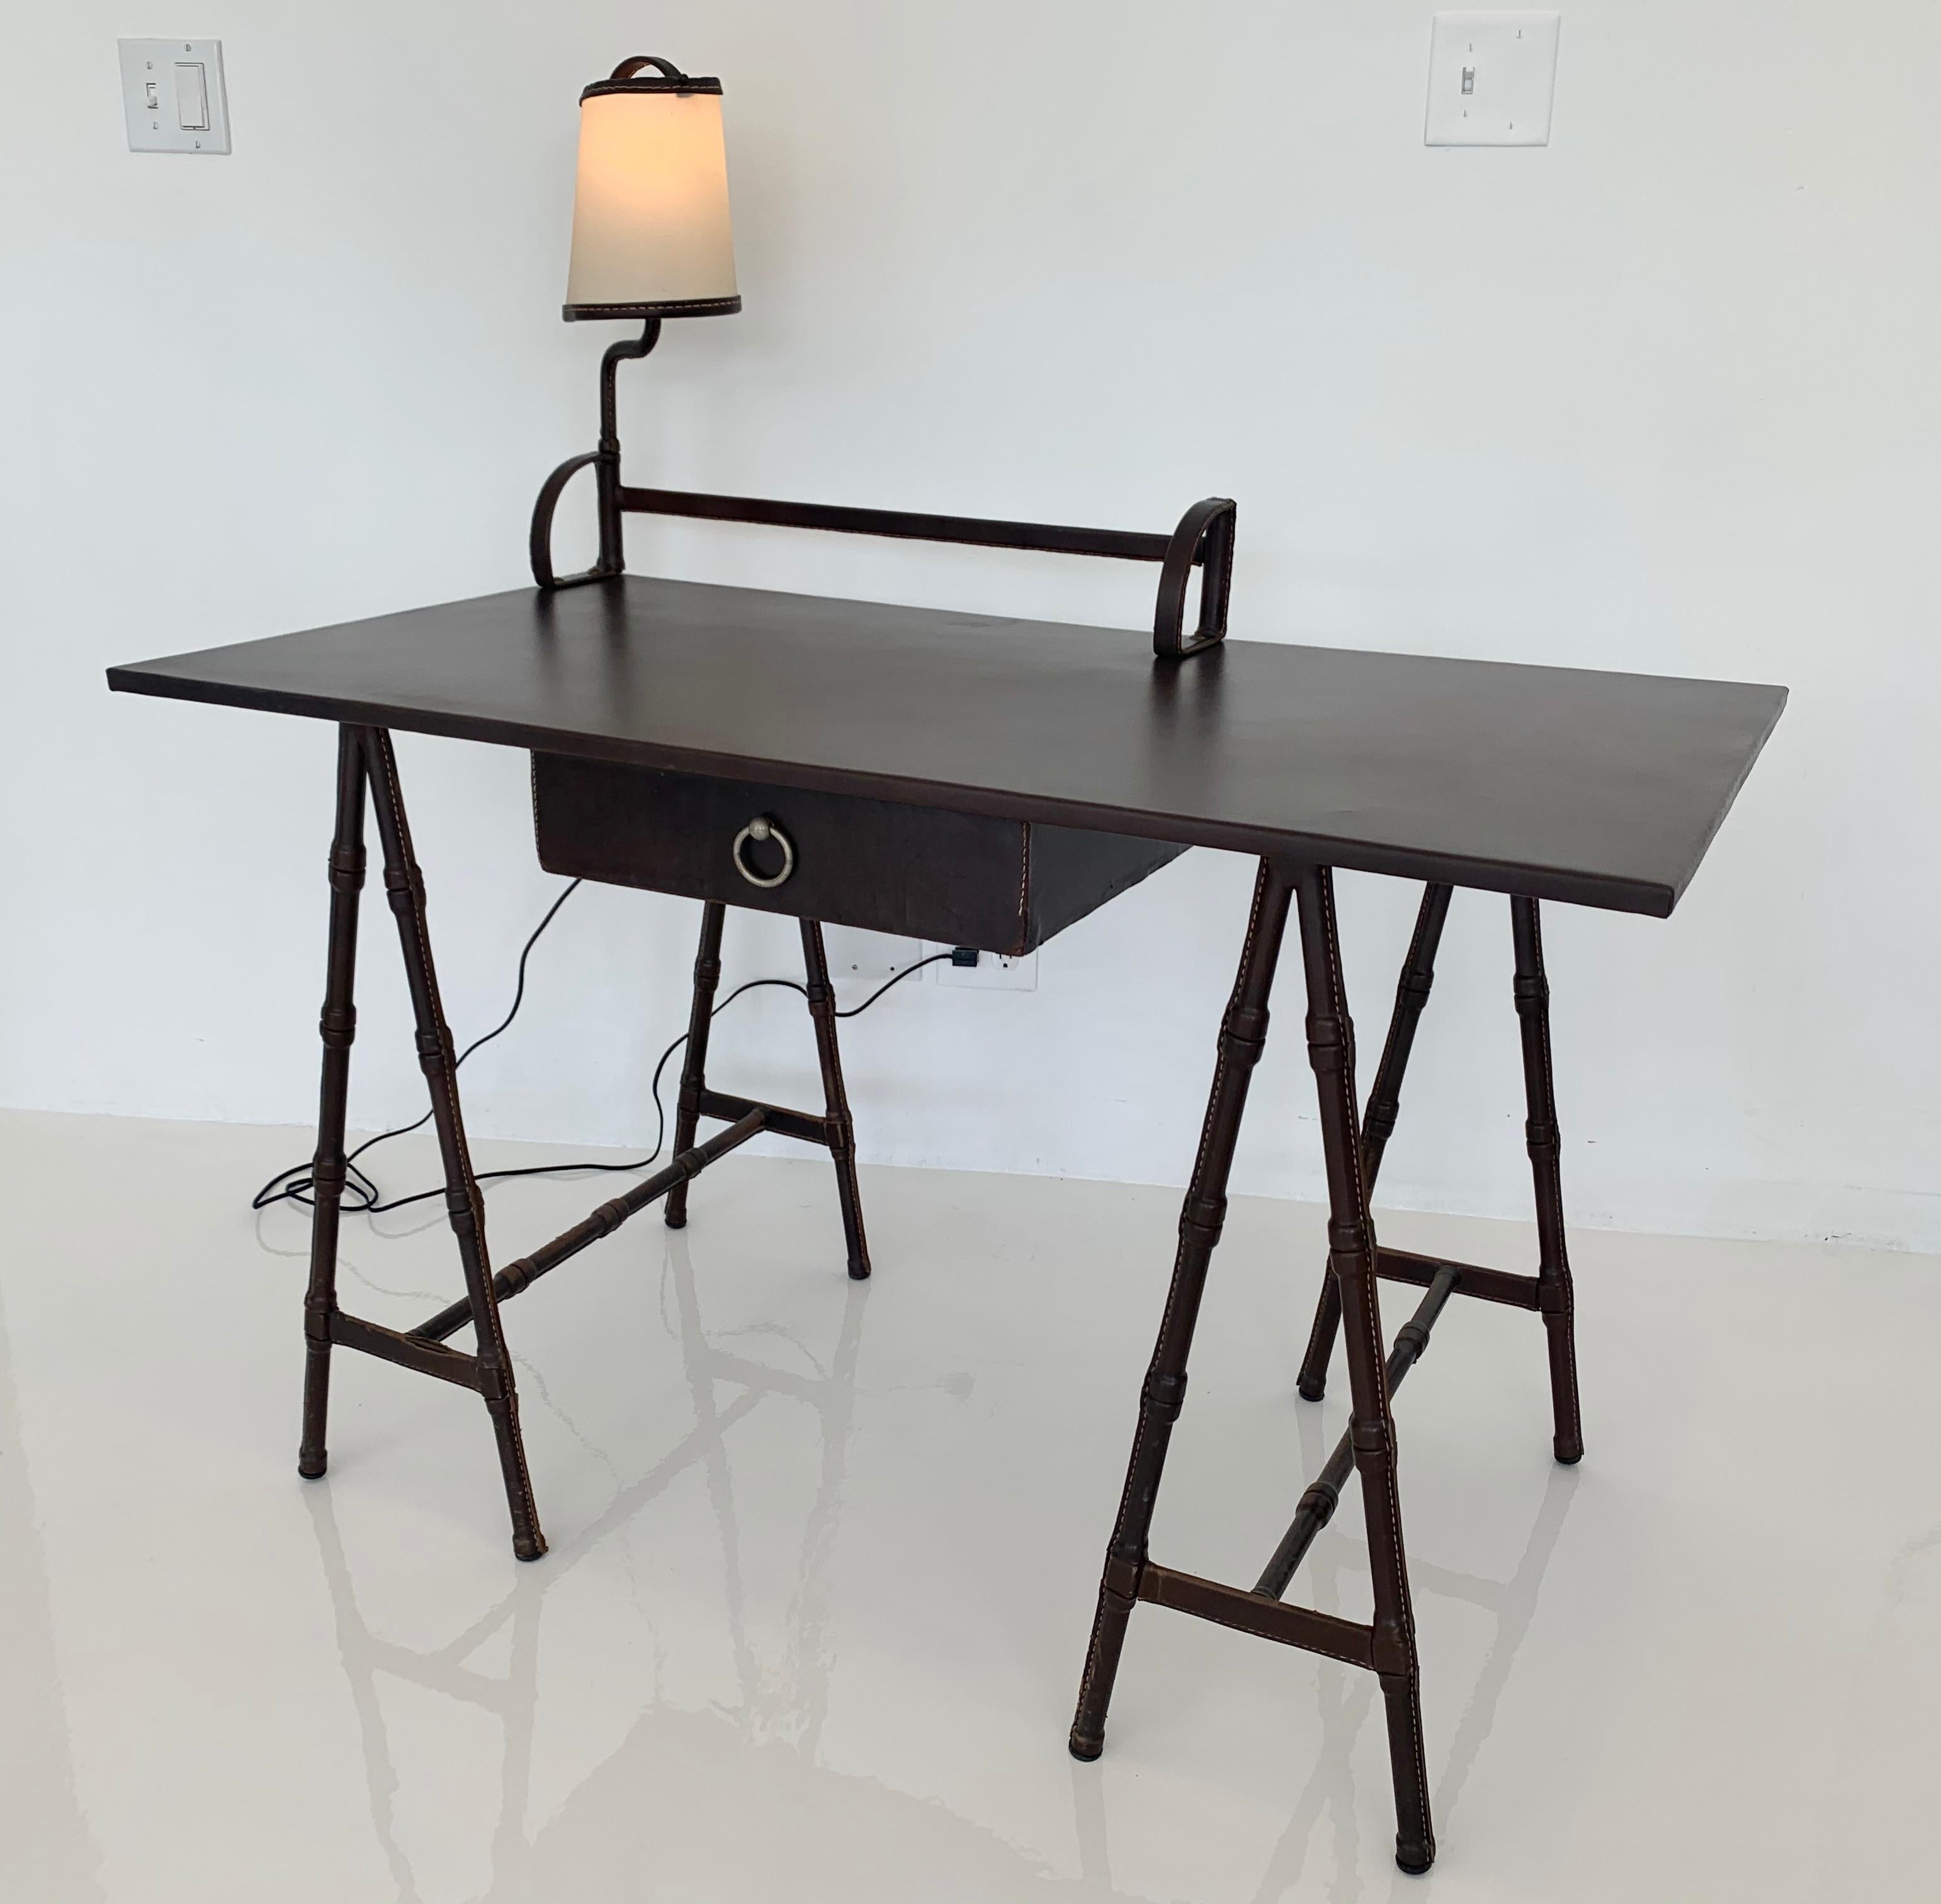 Monumental leather desk by French designer Jacques Adnet. Built in bookshelf. Built in swivel lamp. Newly rewired. Entire desk and all parts completely wrapped in chocolate brown leather. Signature Adnet contrast stitching. Pull out drawer with